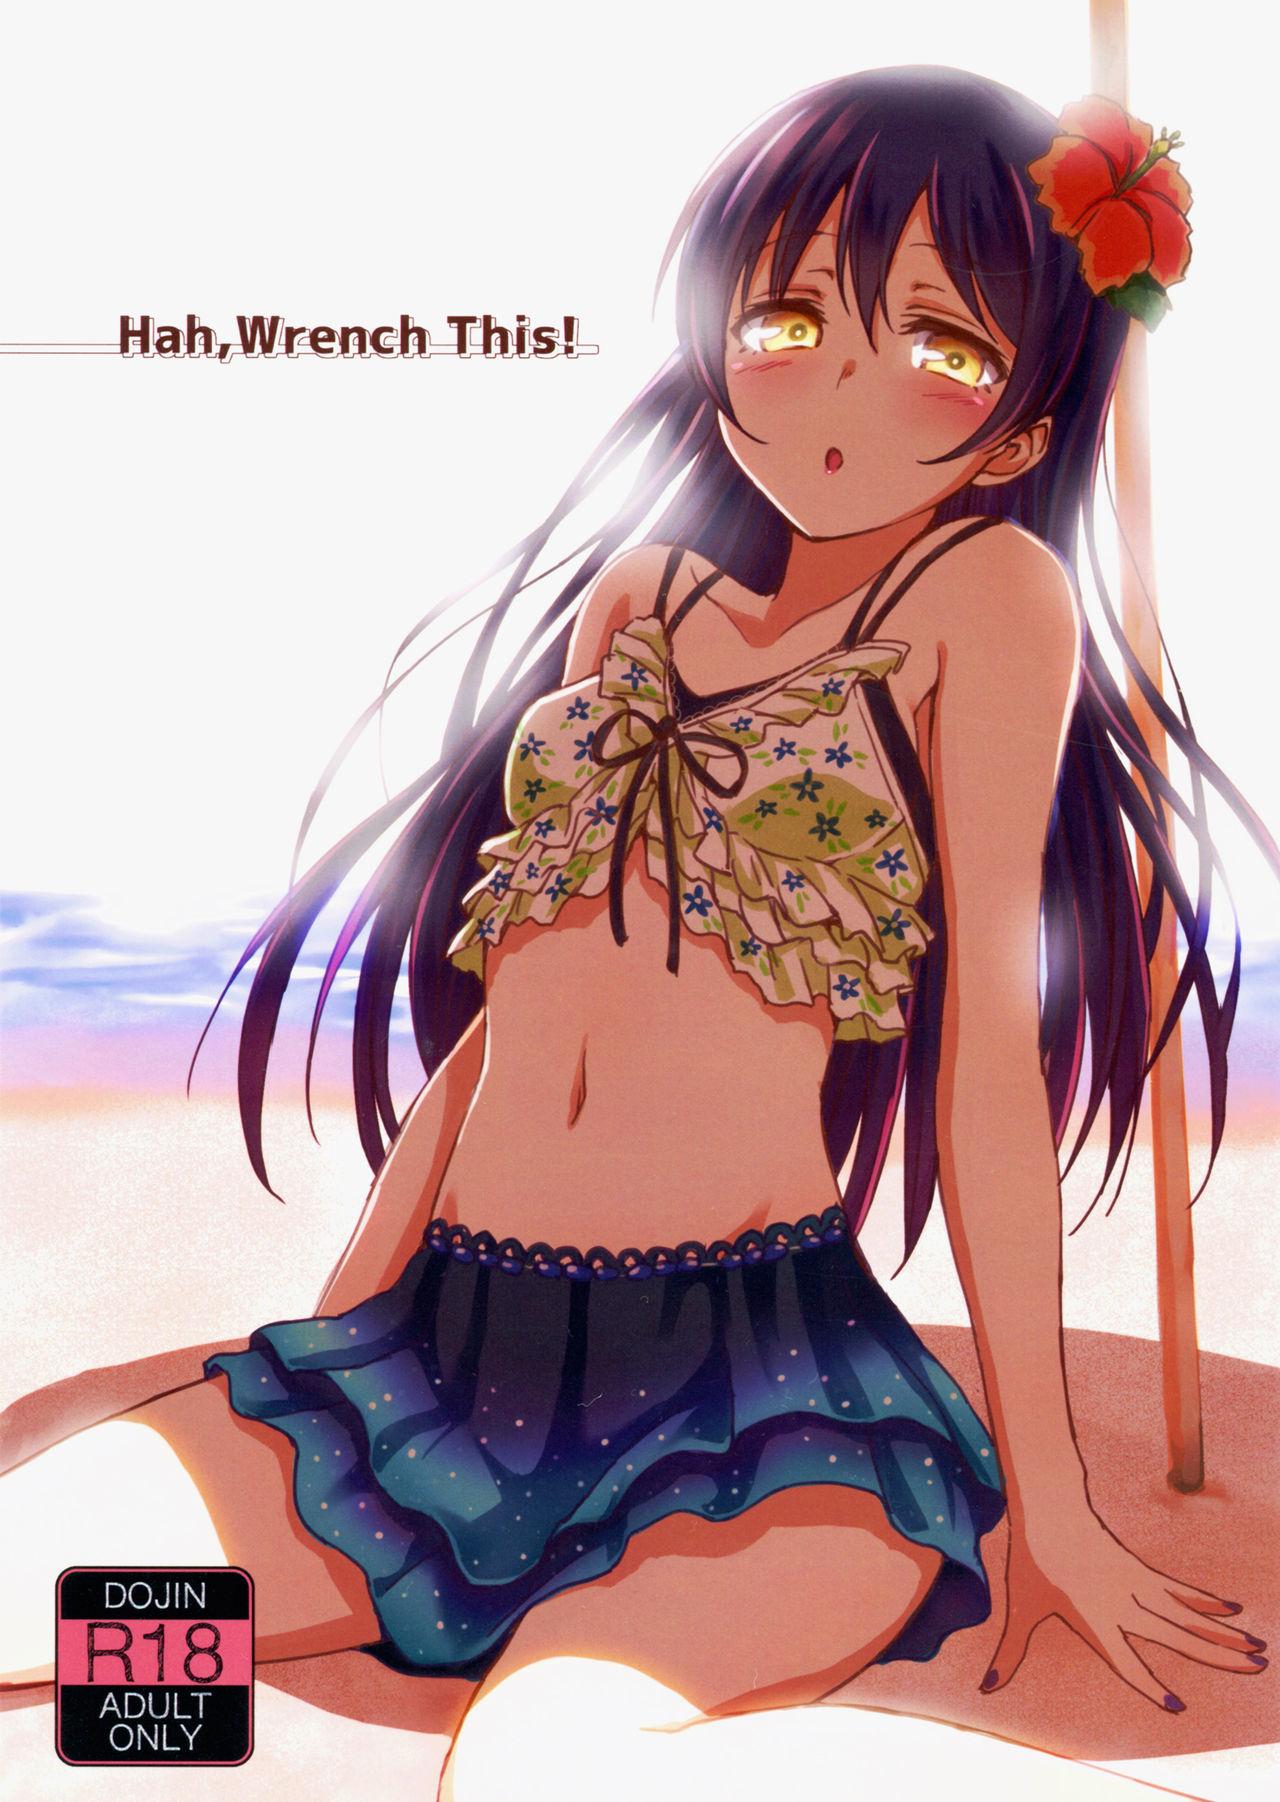 Semen Hah,Wrench This! - Love live Funny - Picture 1